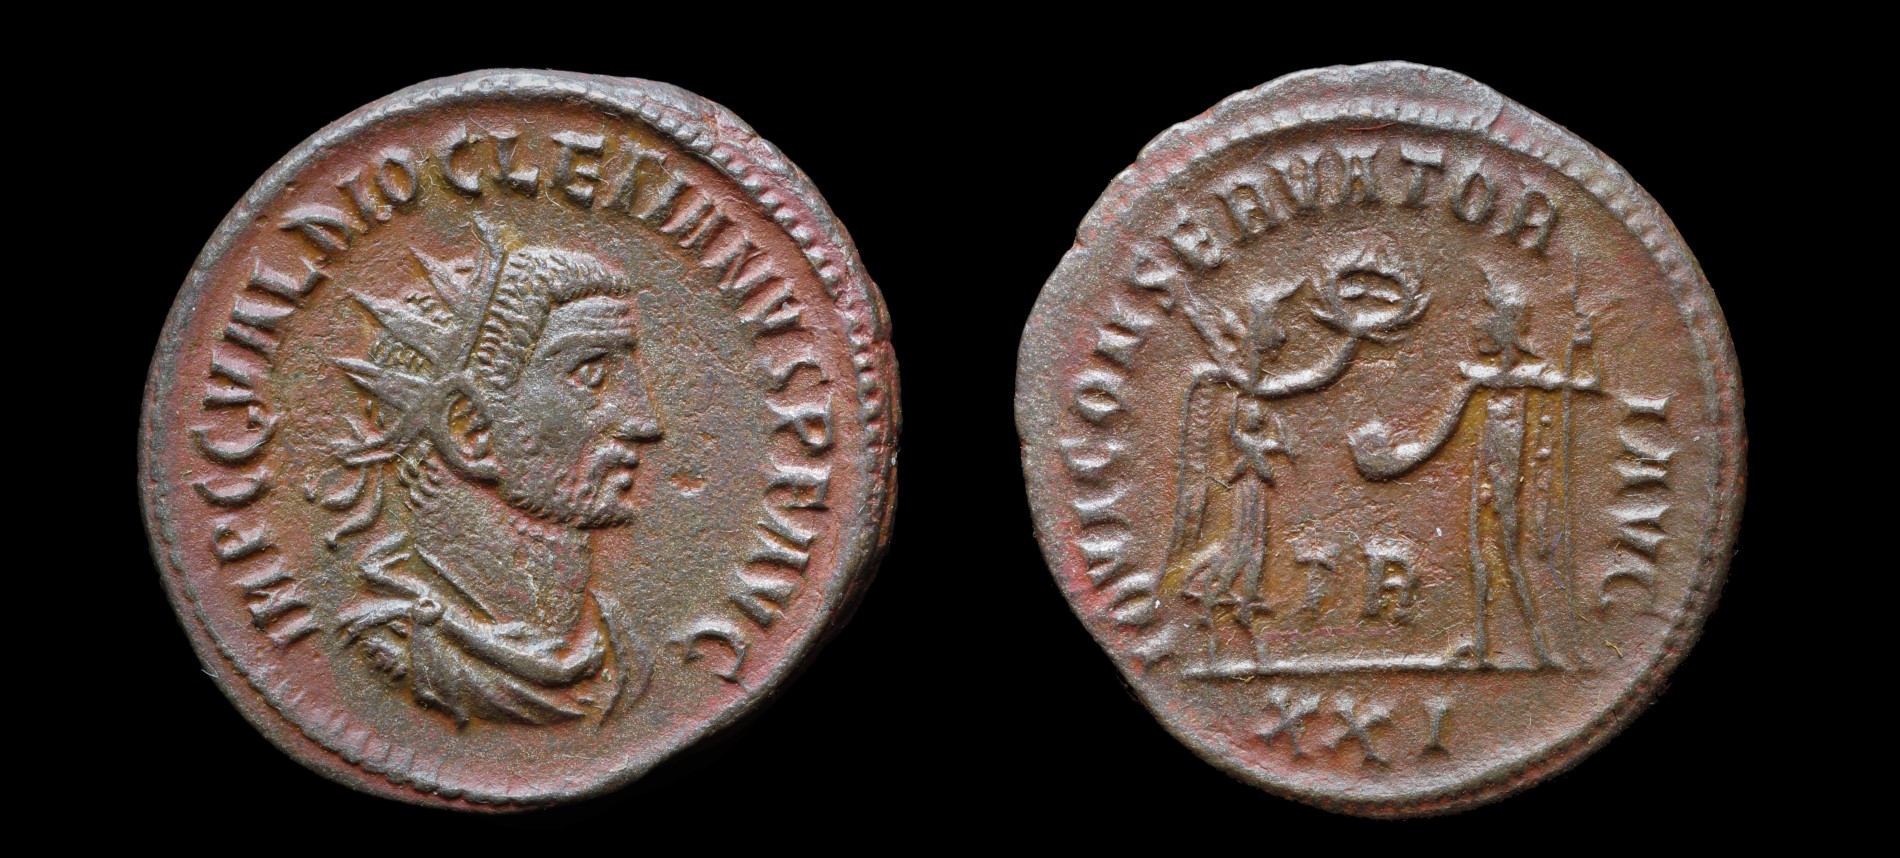 6.017 Diocletian Ant resized.jpg